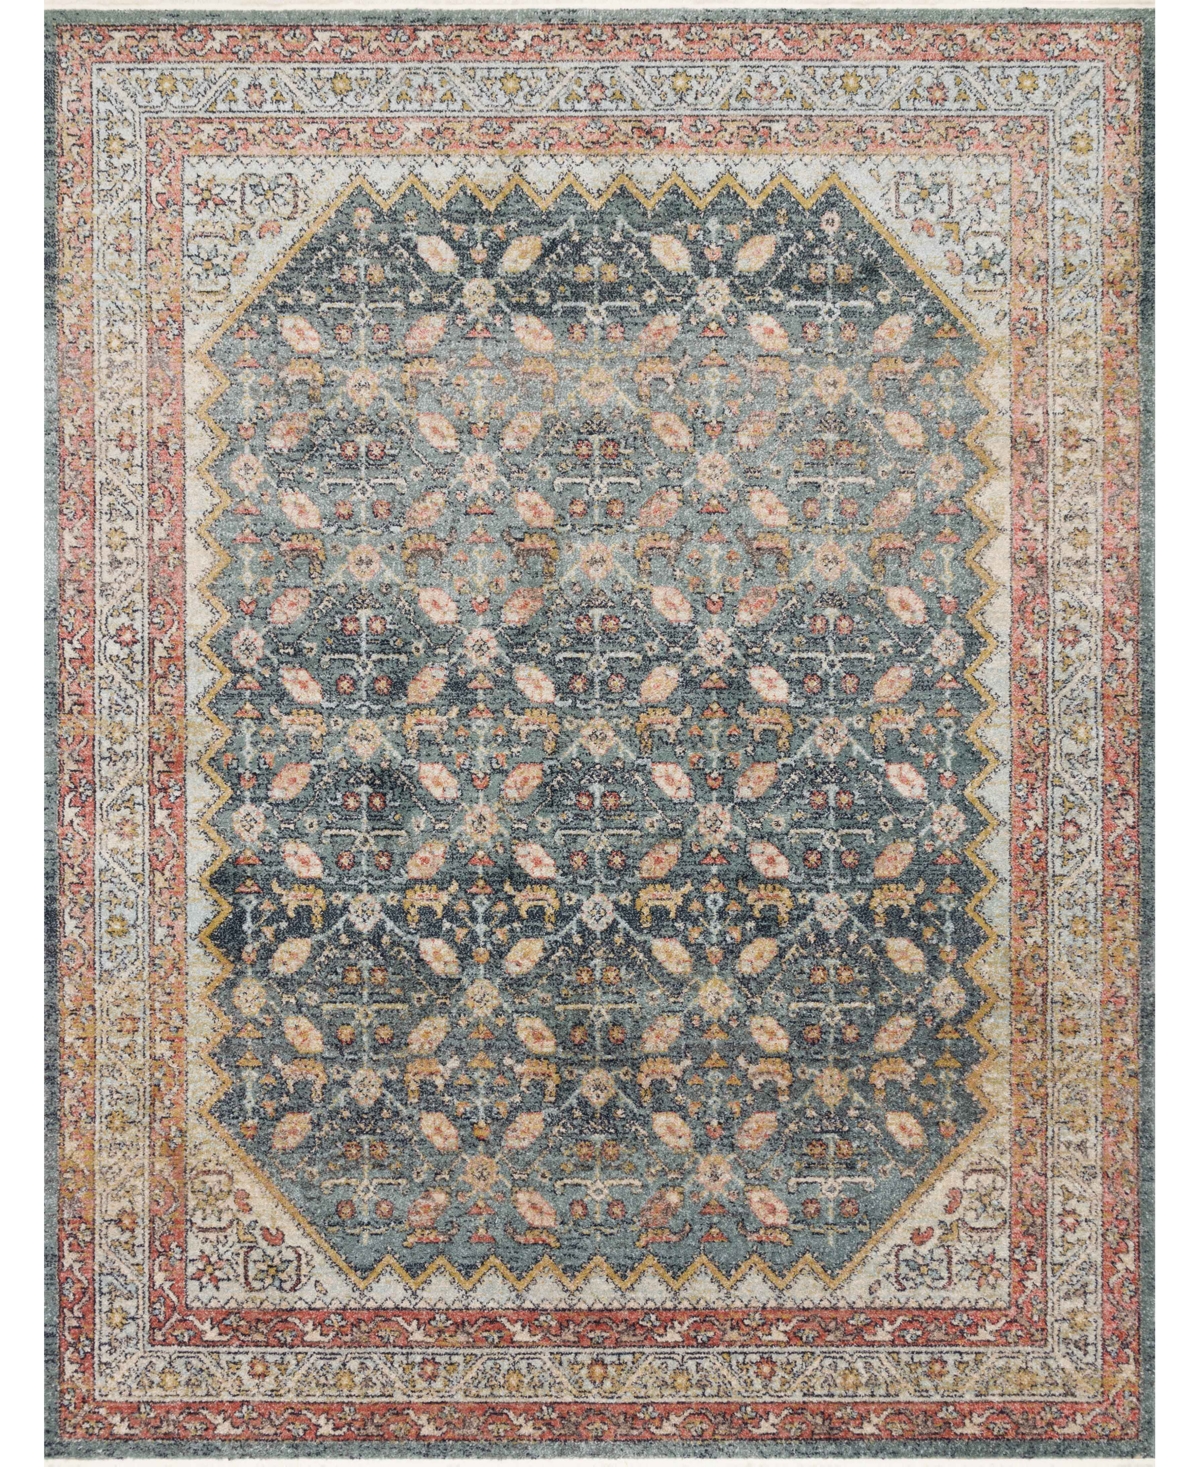 Magnolia Home By Joanna Gaines X Loloi Graham Gra-01 6'7" X 9'7" Area Rug In Blue